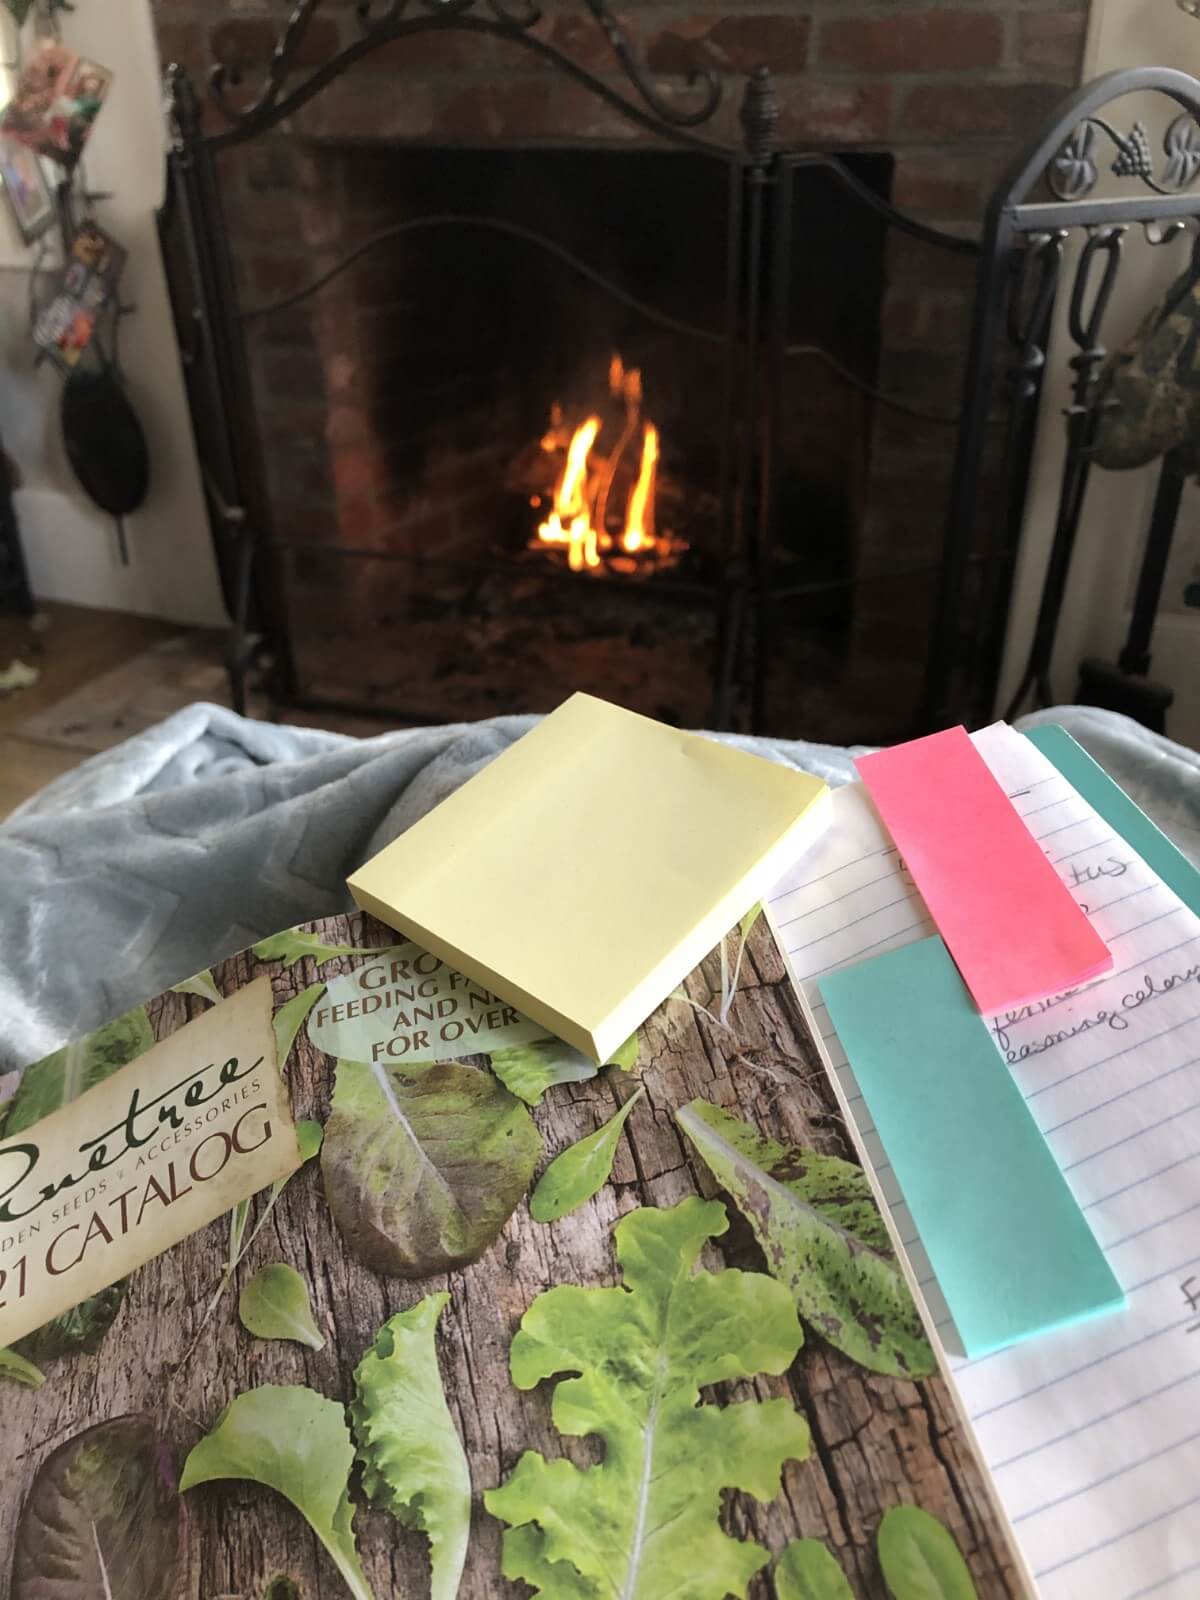 seed catalogs and notebook on lap by a fireplace